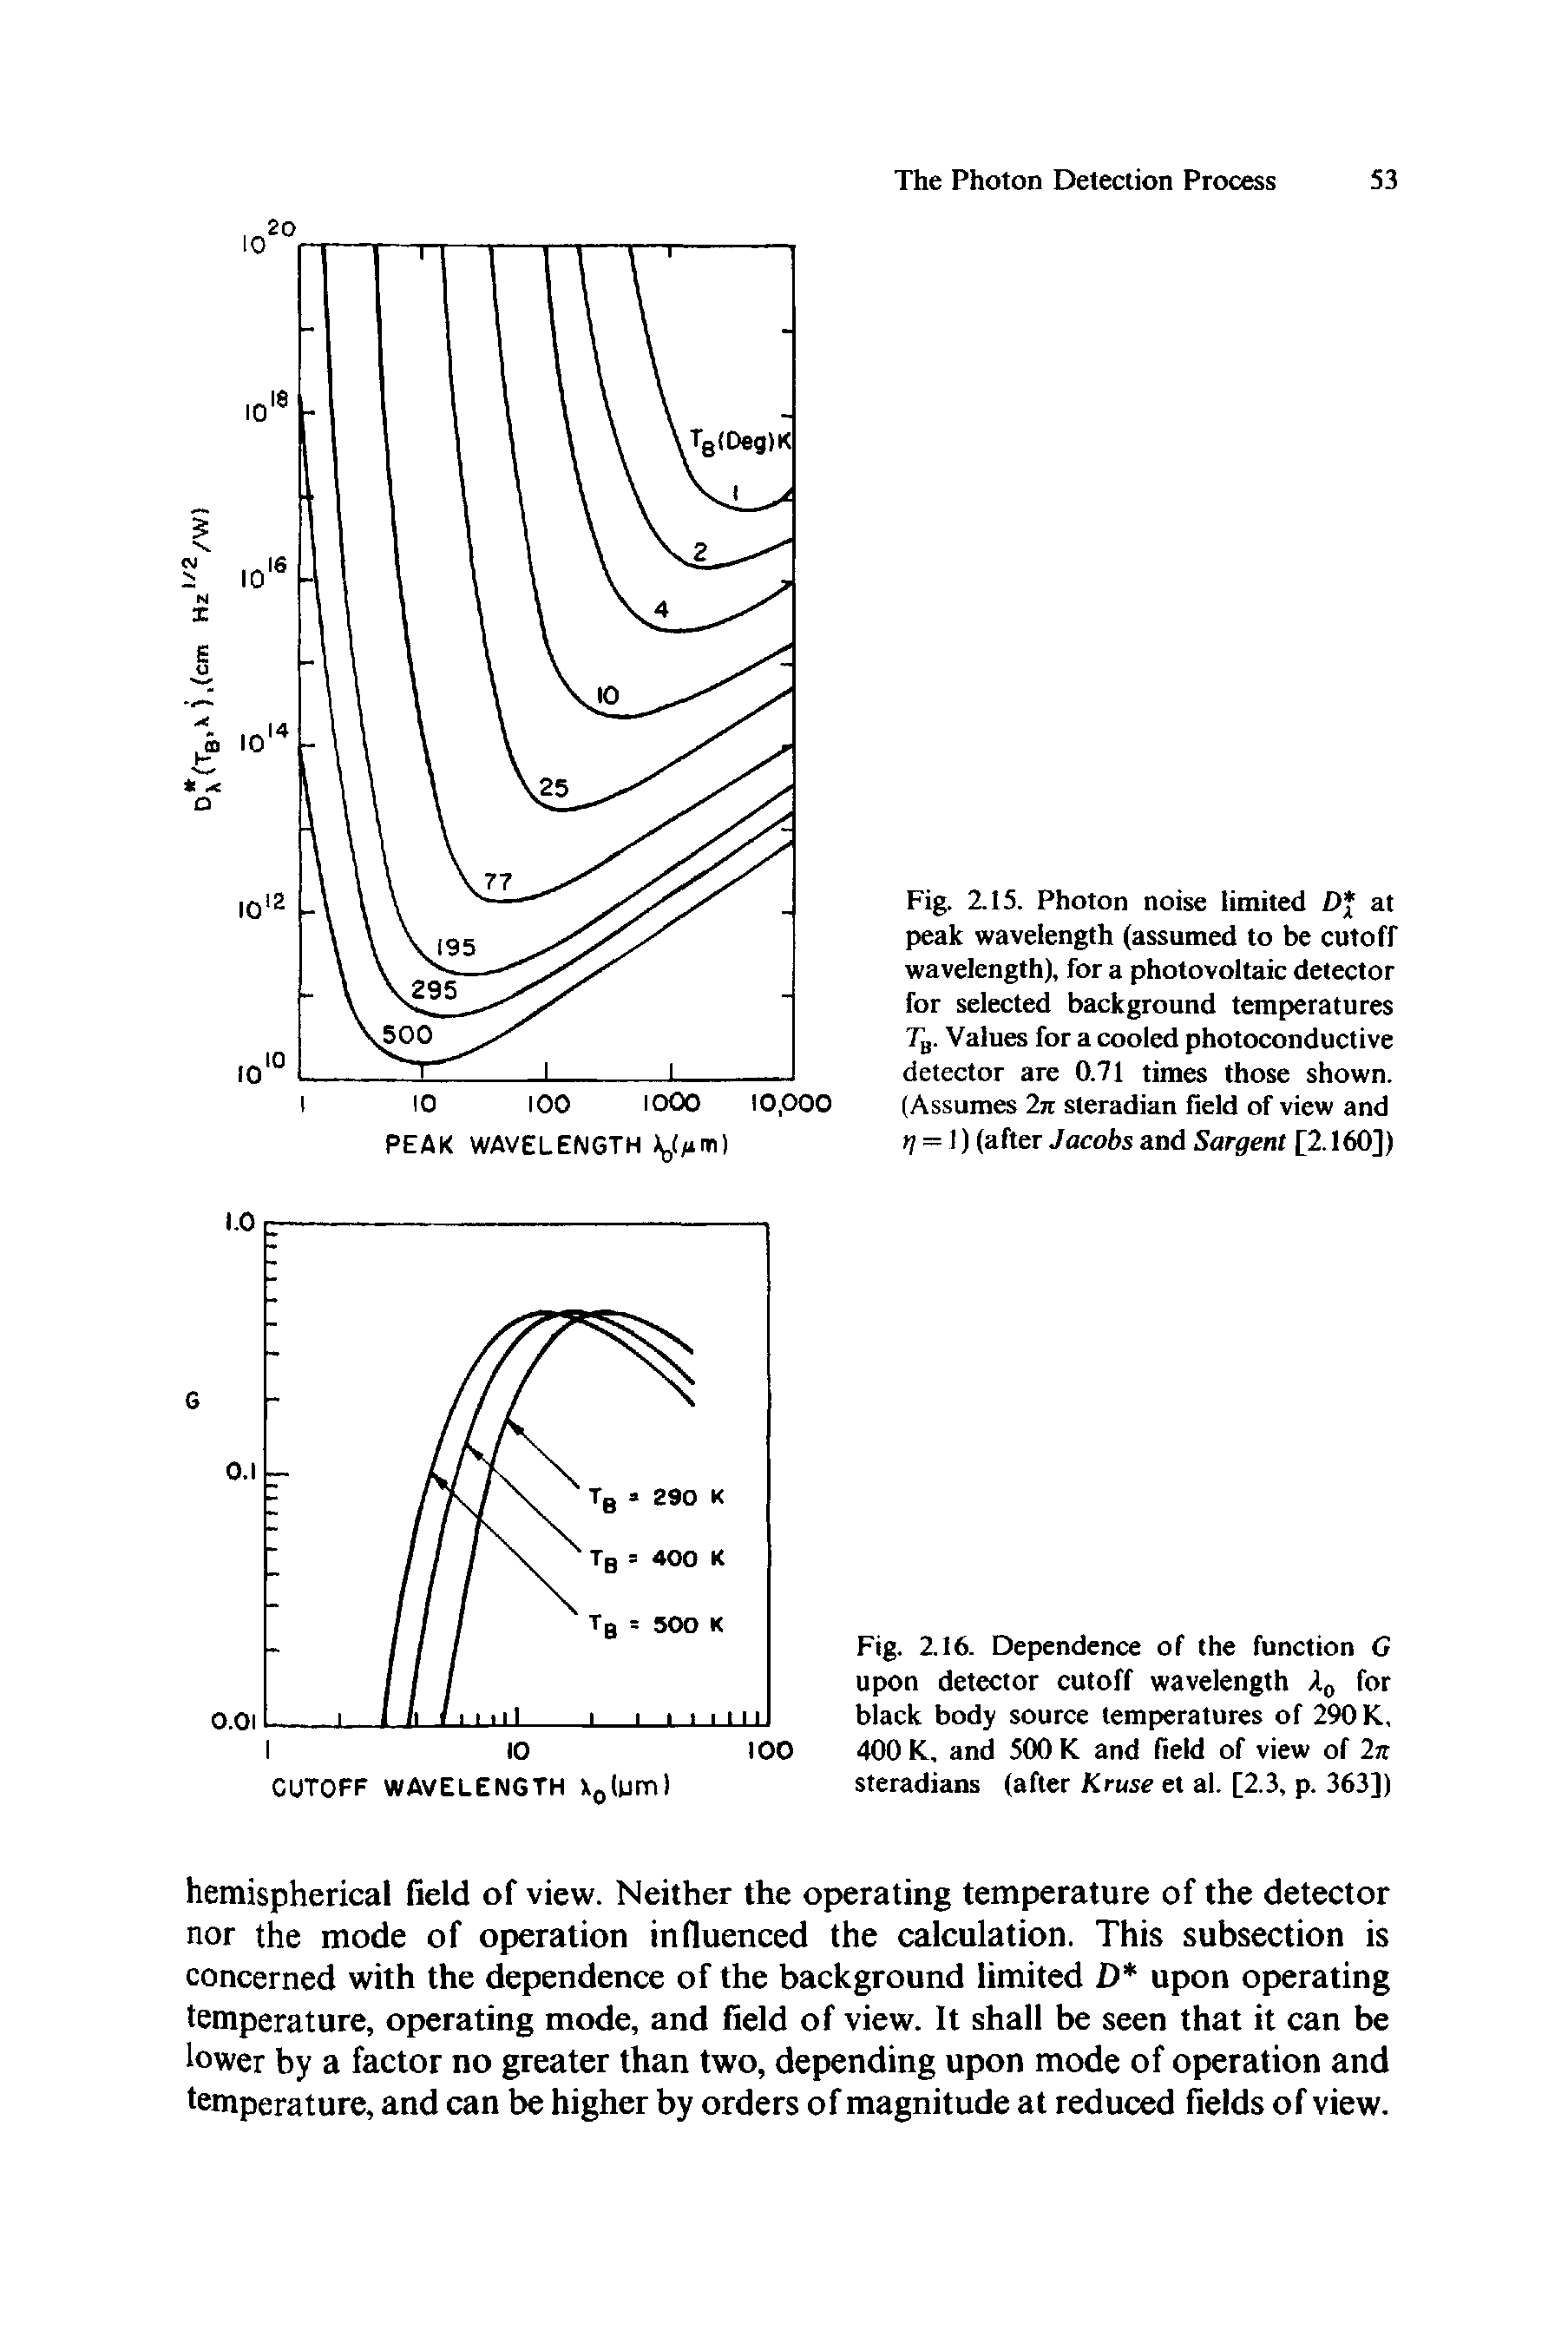 Fig. 2.15. Photon noise limited Df at peak wavelength (assumed to be cutoff wavelength), for a photovoltaic detector for selected background temperatures Tg. Values for a cooled photoconductive detector are 0.71 times those shown. (Assumes 27t steradian field of view and >/ = 1) (after Jacobs and Sargent [2.160])...